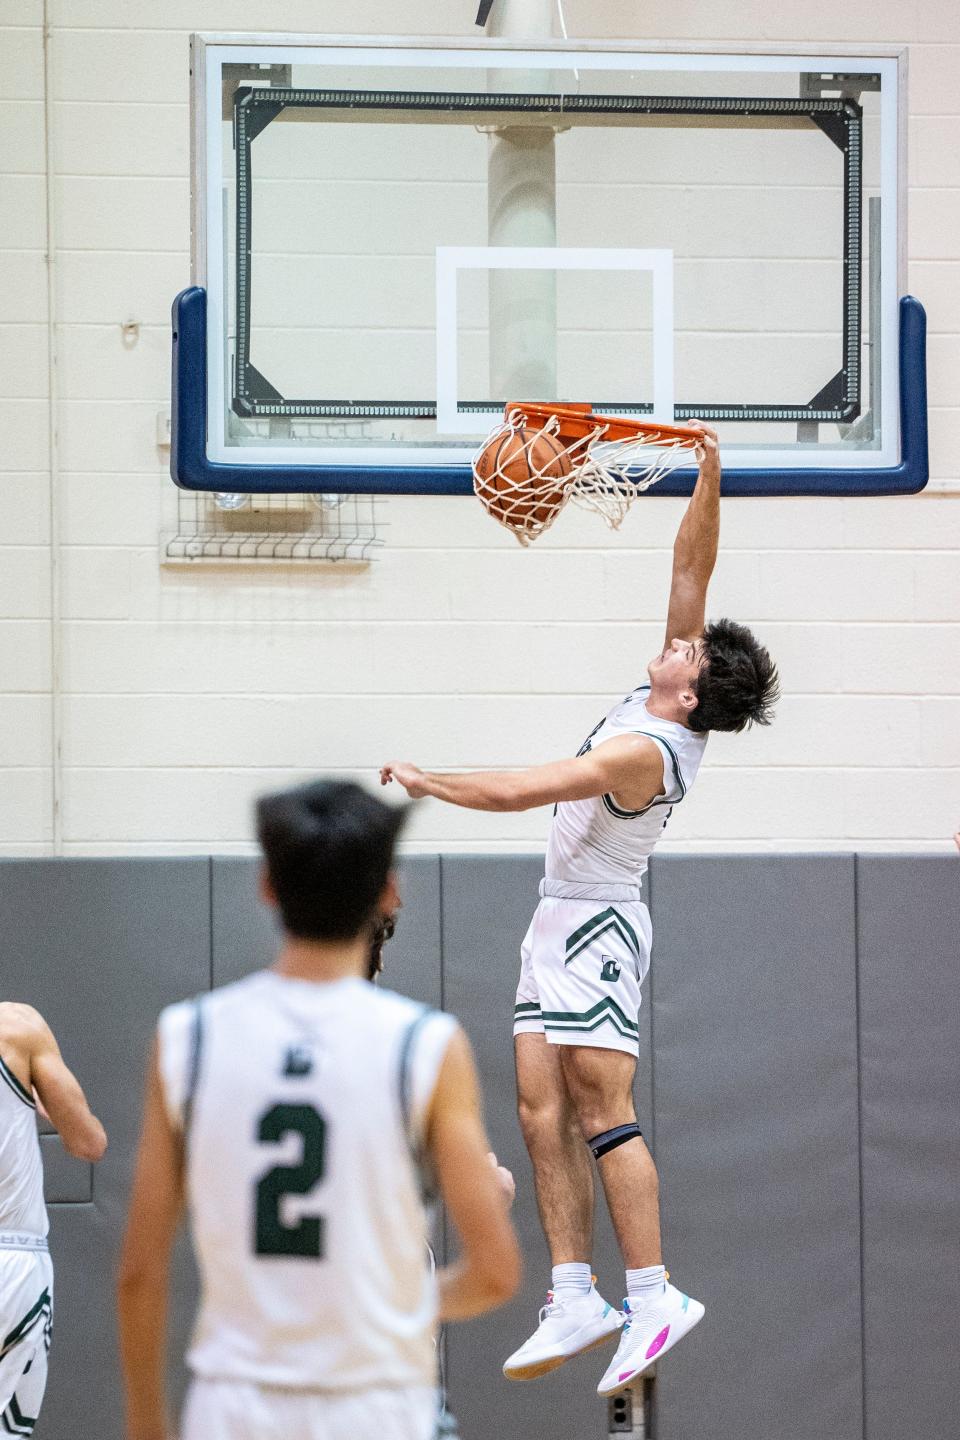 Chatham plays Delbarton in the Morris County Tournament boys basketball semifinals at County College of Morris in Randolph, NJ on Saturday, Feb. 11, 2023. D #4 Michael Van Raaphorst scores.